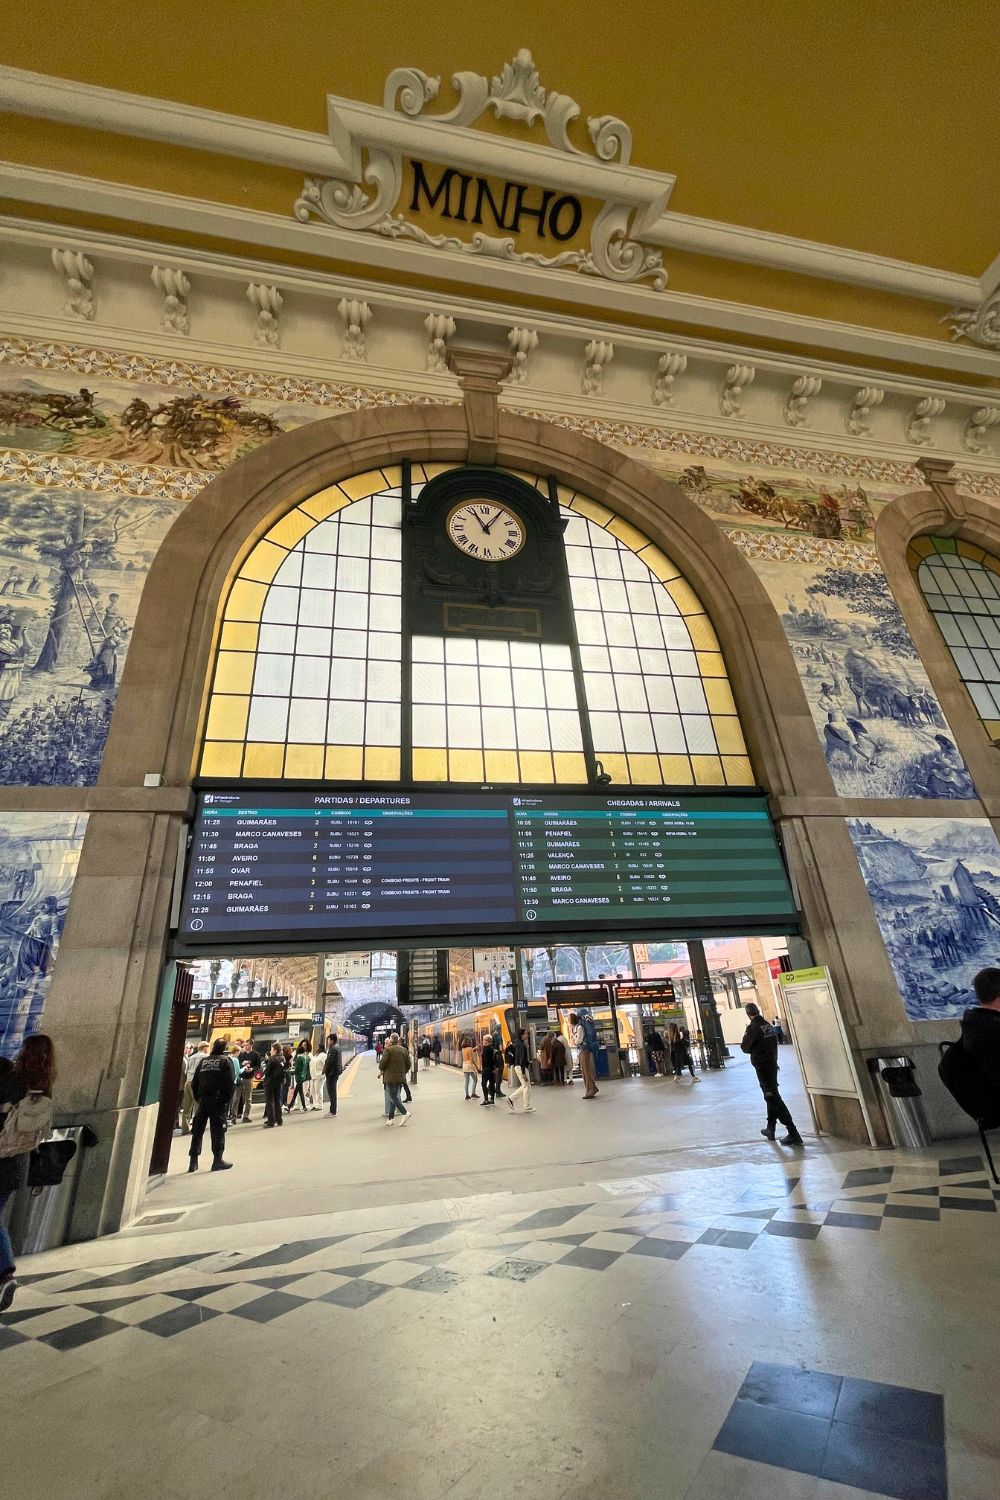 The grand interior of São Bento Railway Station in Porto, with its historic clock and azulejo tile panels depicting scenes of Portuguese history.